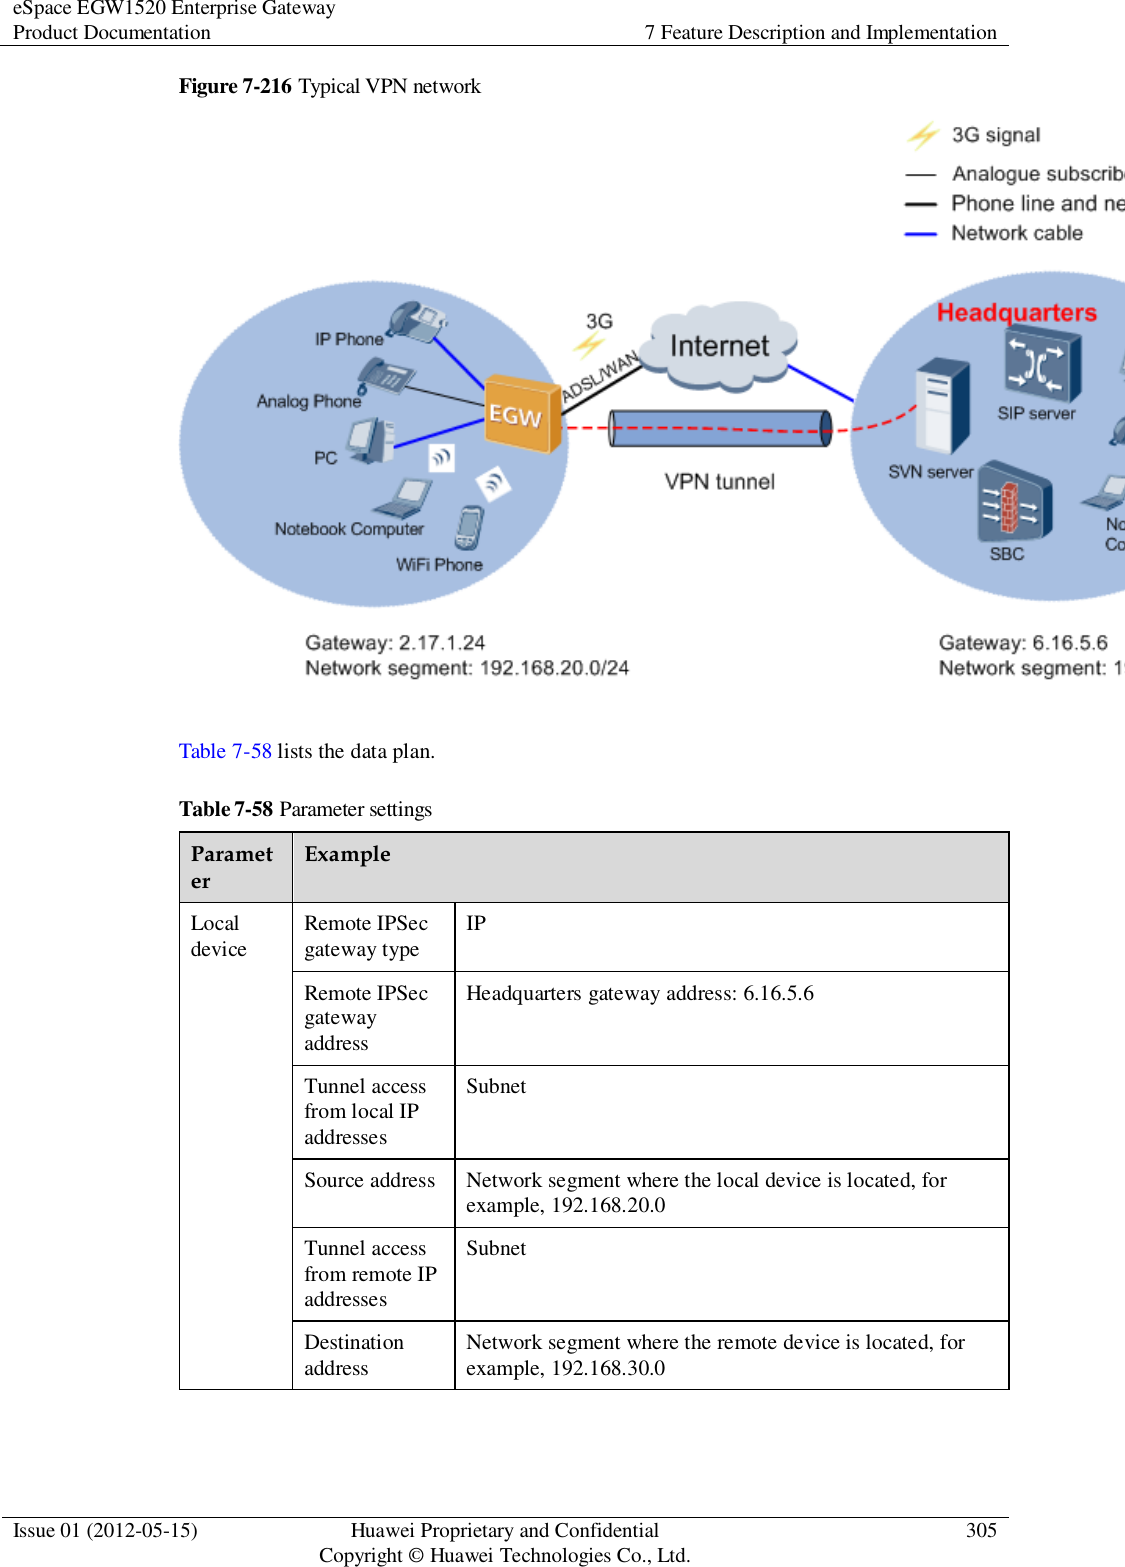 eSpace EGW1520 Enterprise Gateway Product Documentation 7 Feature Description and Implementation  Issue 01 (2012-05-15) Huawei Proprietary and Confidential                                     Copyright © Huawei Technologies Co., Ltd. 305  Figure 7-216 Typical VPN network   Table 7-58 lists the data plan. Table 7-58 Parameter settings Parameter Example Local device Remote IPSec gateway type IP Remote IPSec gateway address Headquarters gateway address: 6.16.5.6 Tunnel access from local IP addresses Subnet Source address Network segment where the local device is located, for example, 192.168.20.0 Tunnel access from remote IP addresses Subnet Destination address Network segment where the remote device is located, for example, 192.168.30.0  